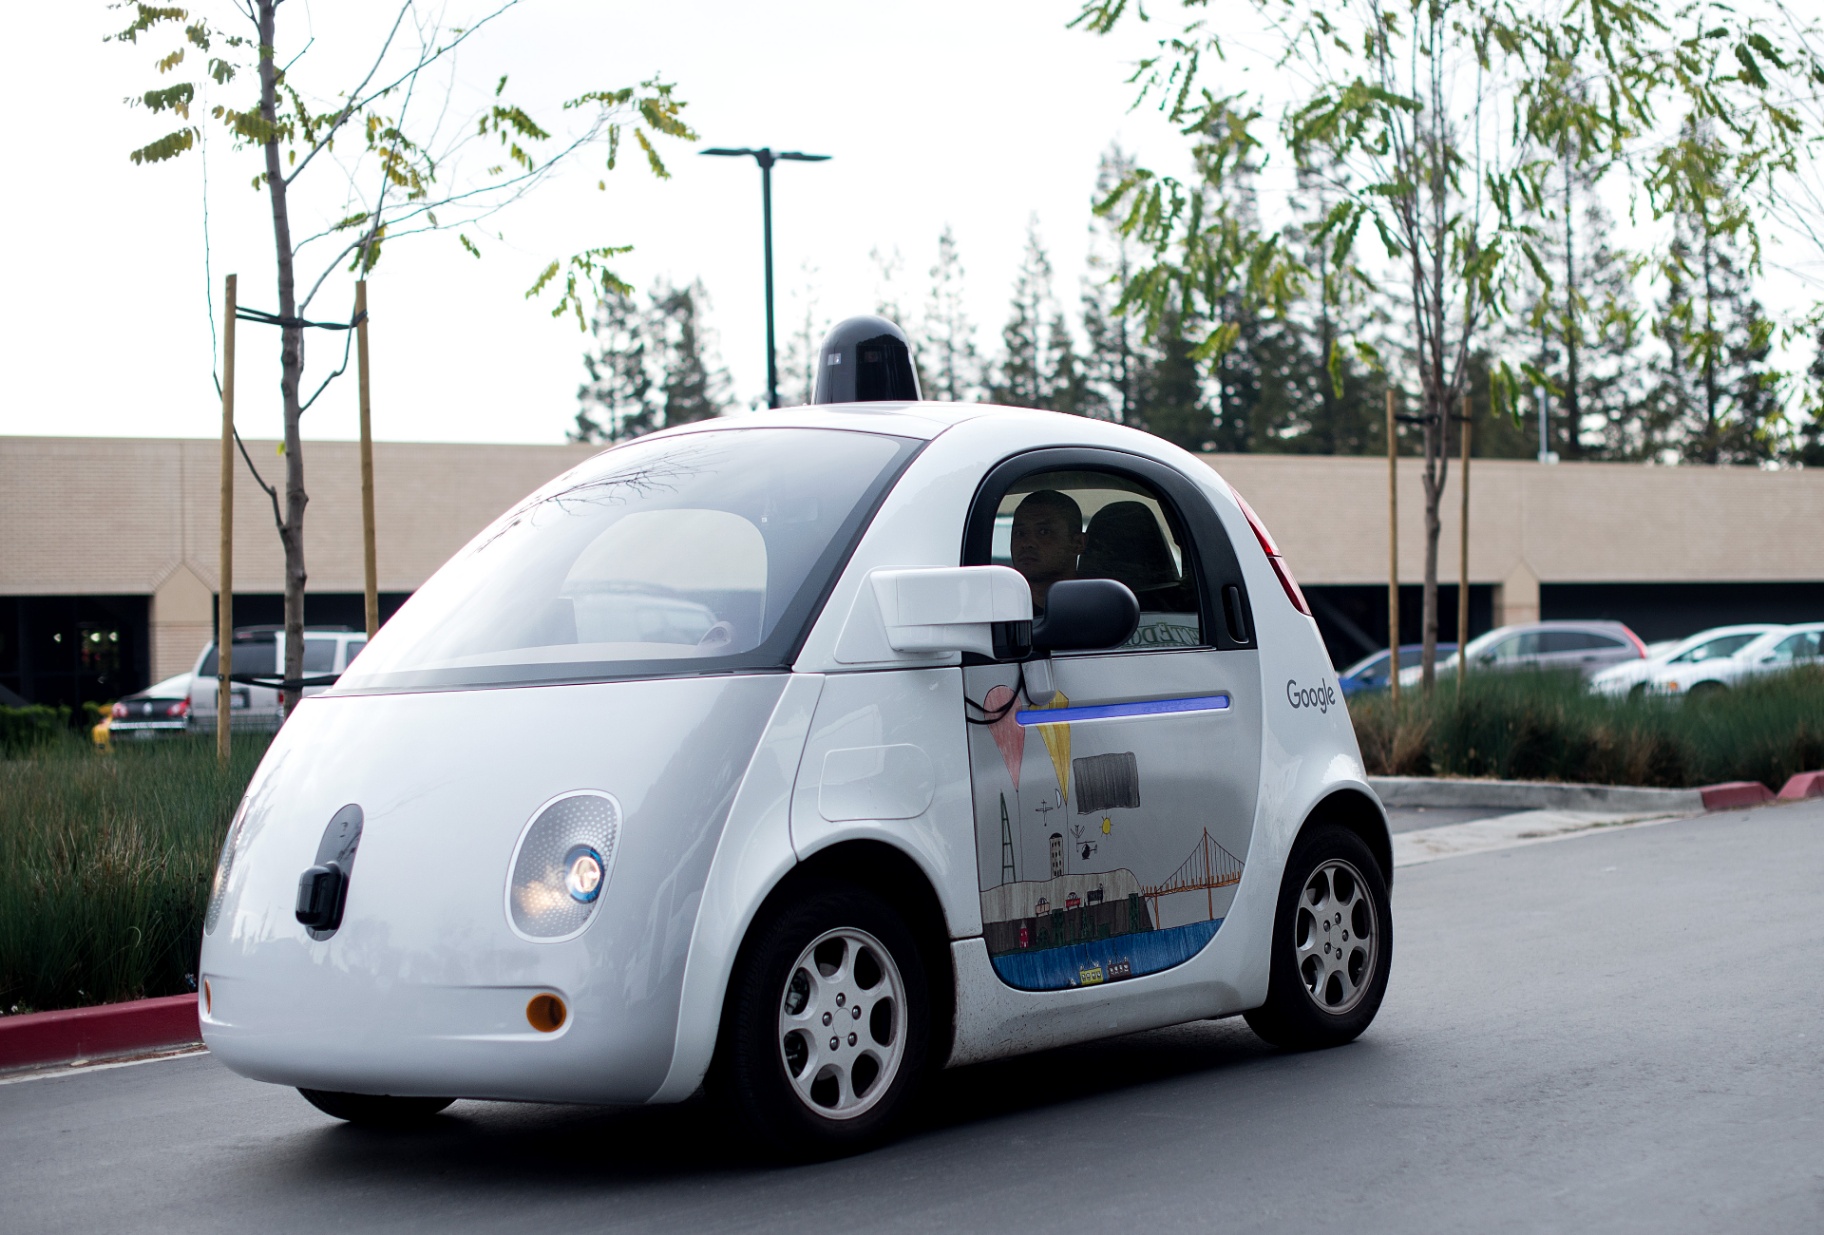 Self-Driving Cars - Discover More About This Technology